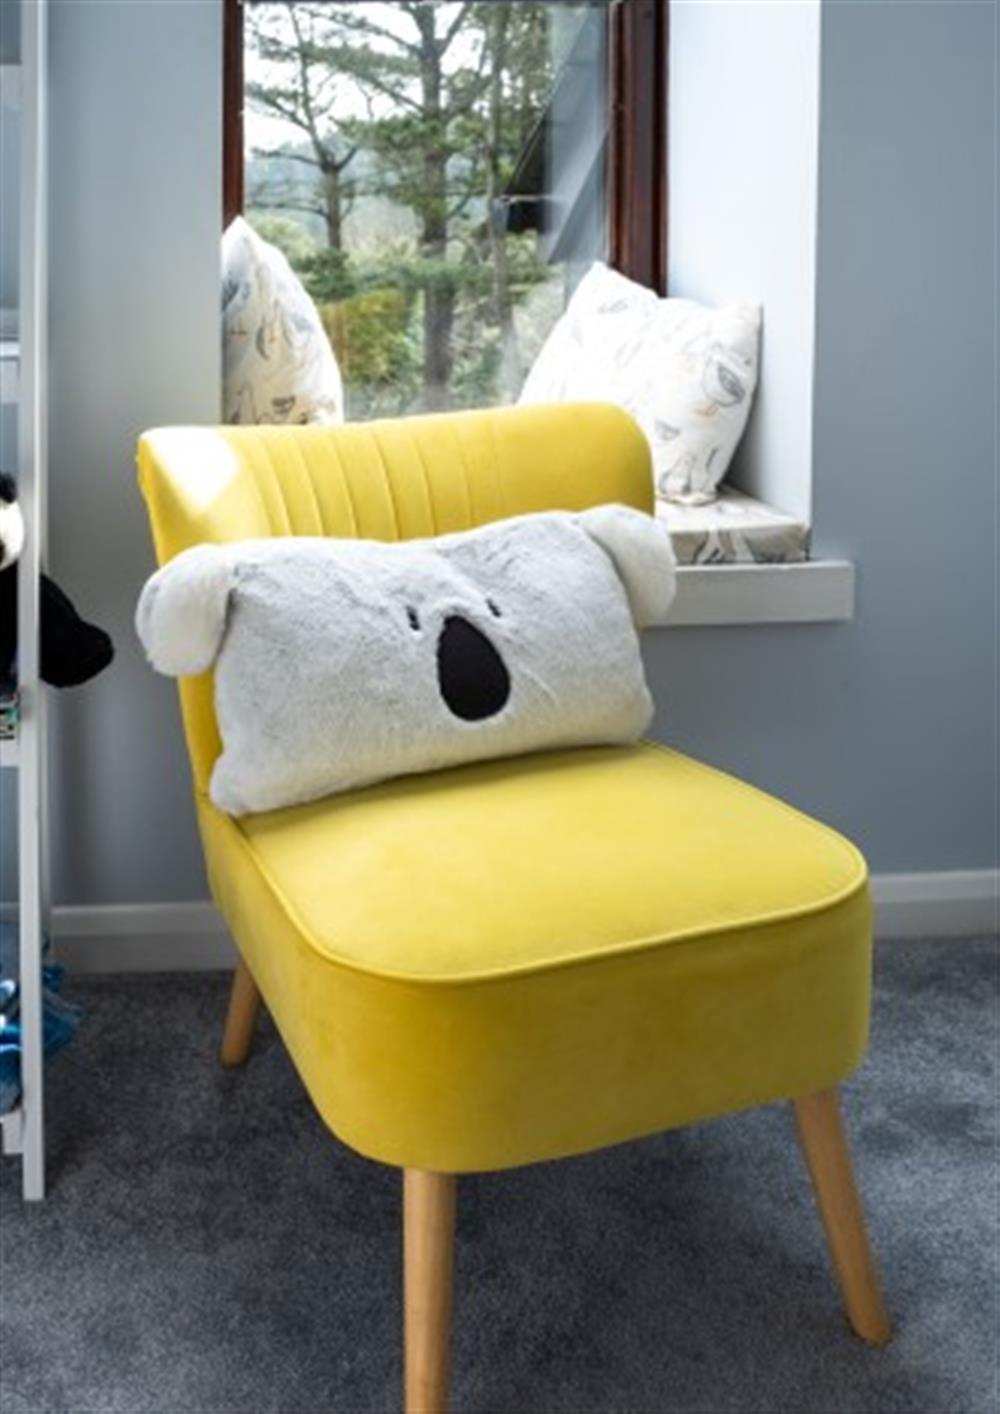 We love this cute koala cushion in the bunk room. at 62 Lower Maen Cottage in Maenporth